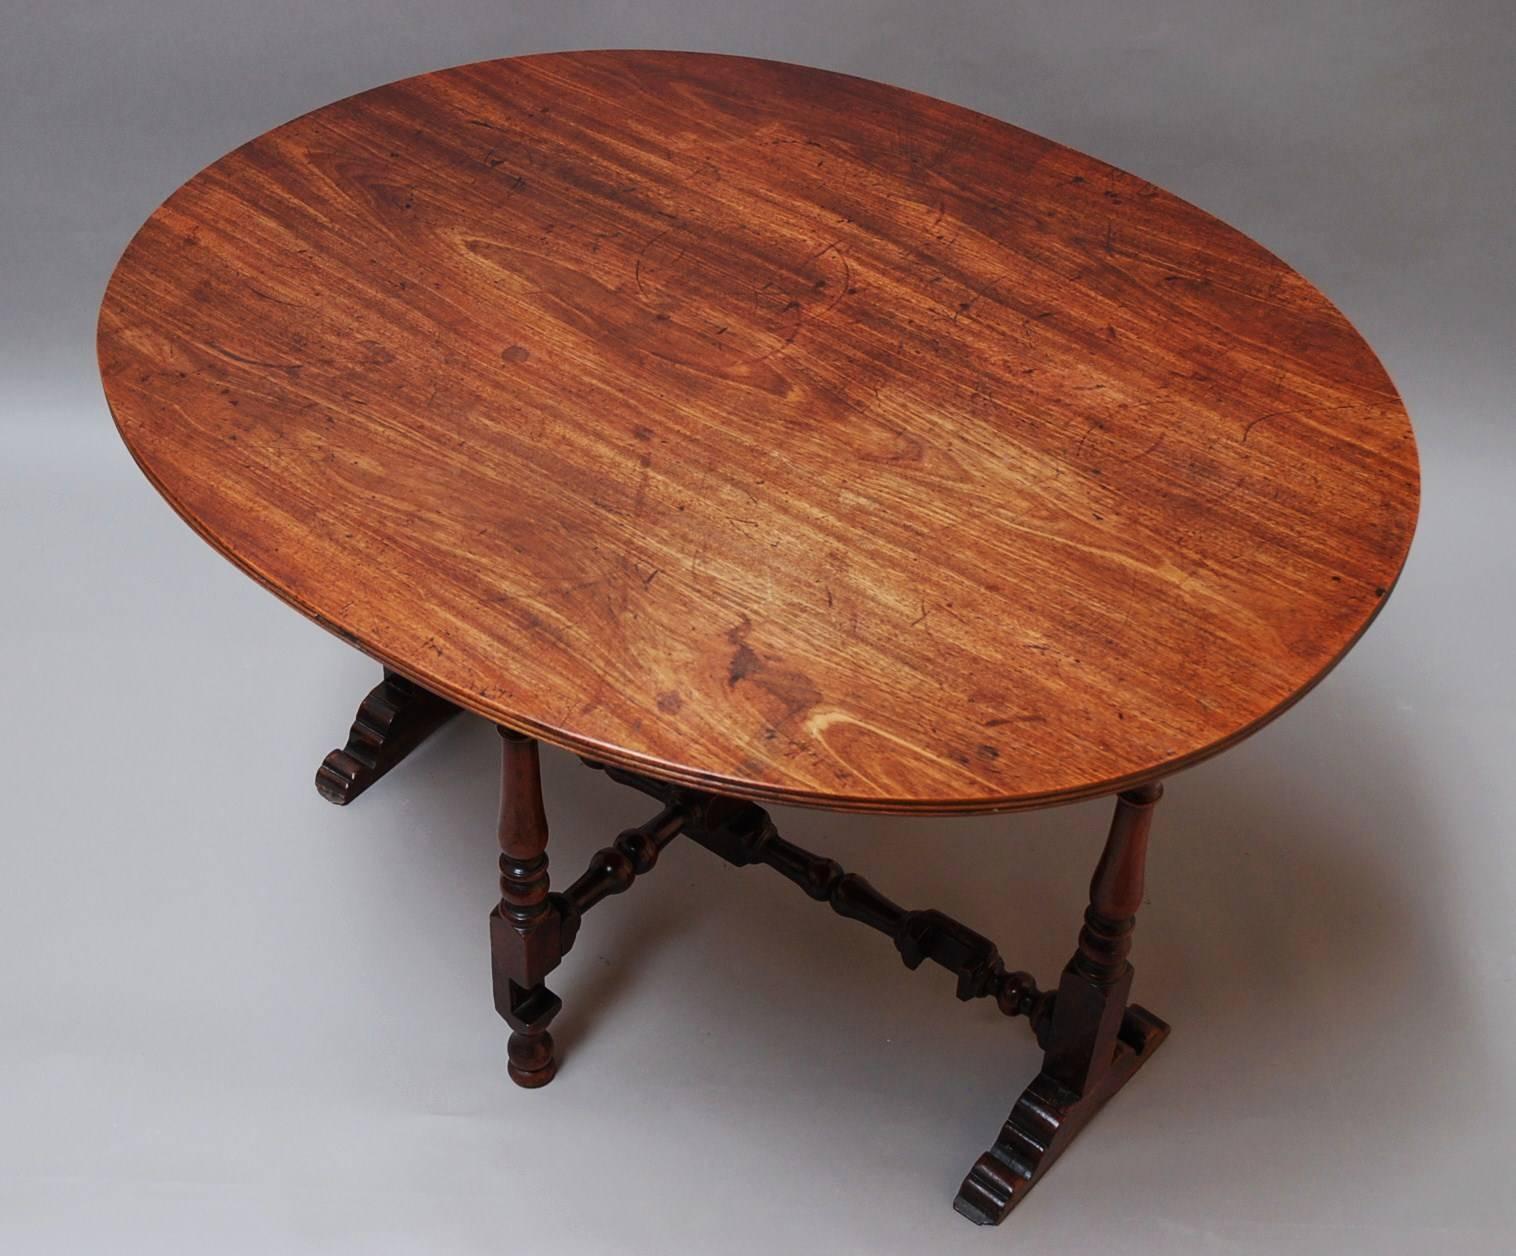 A rare late 17th century yew wood coaching table with later mahogany top of exceptional patina (colour).

This table consists of a late 17th century yew wood base of turned and trestle form of superb patina, one leg having been replaced with